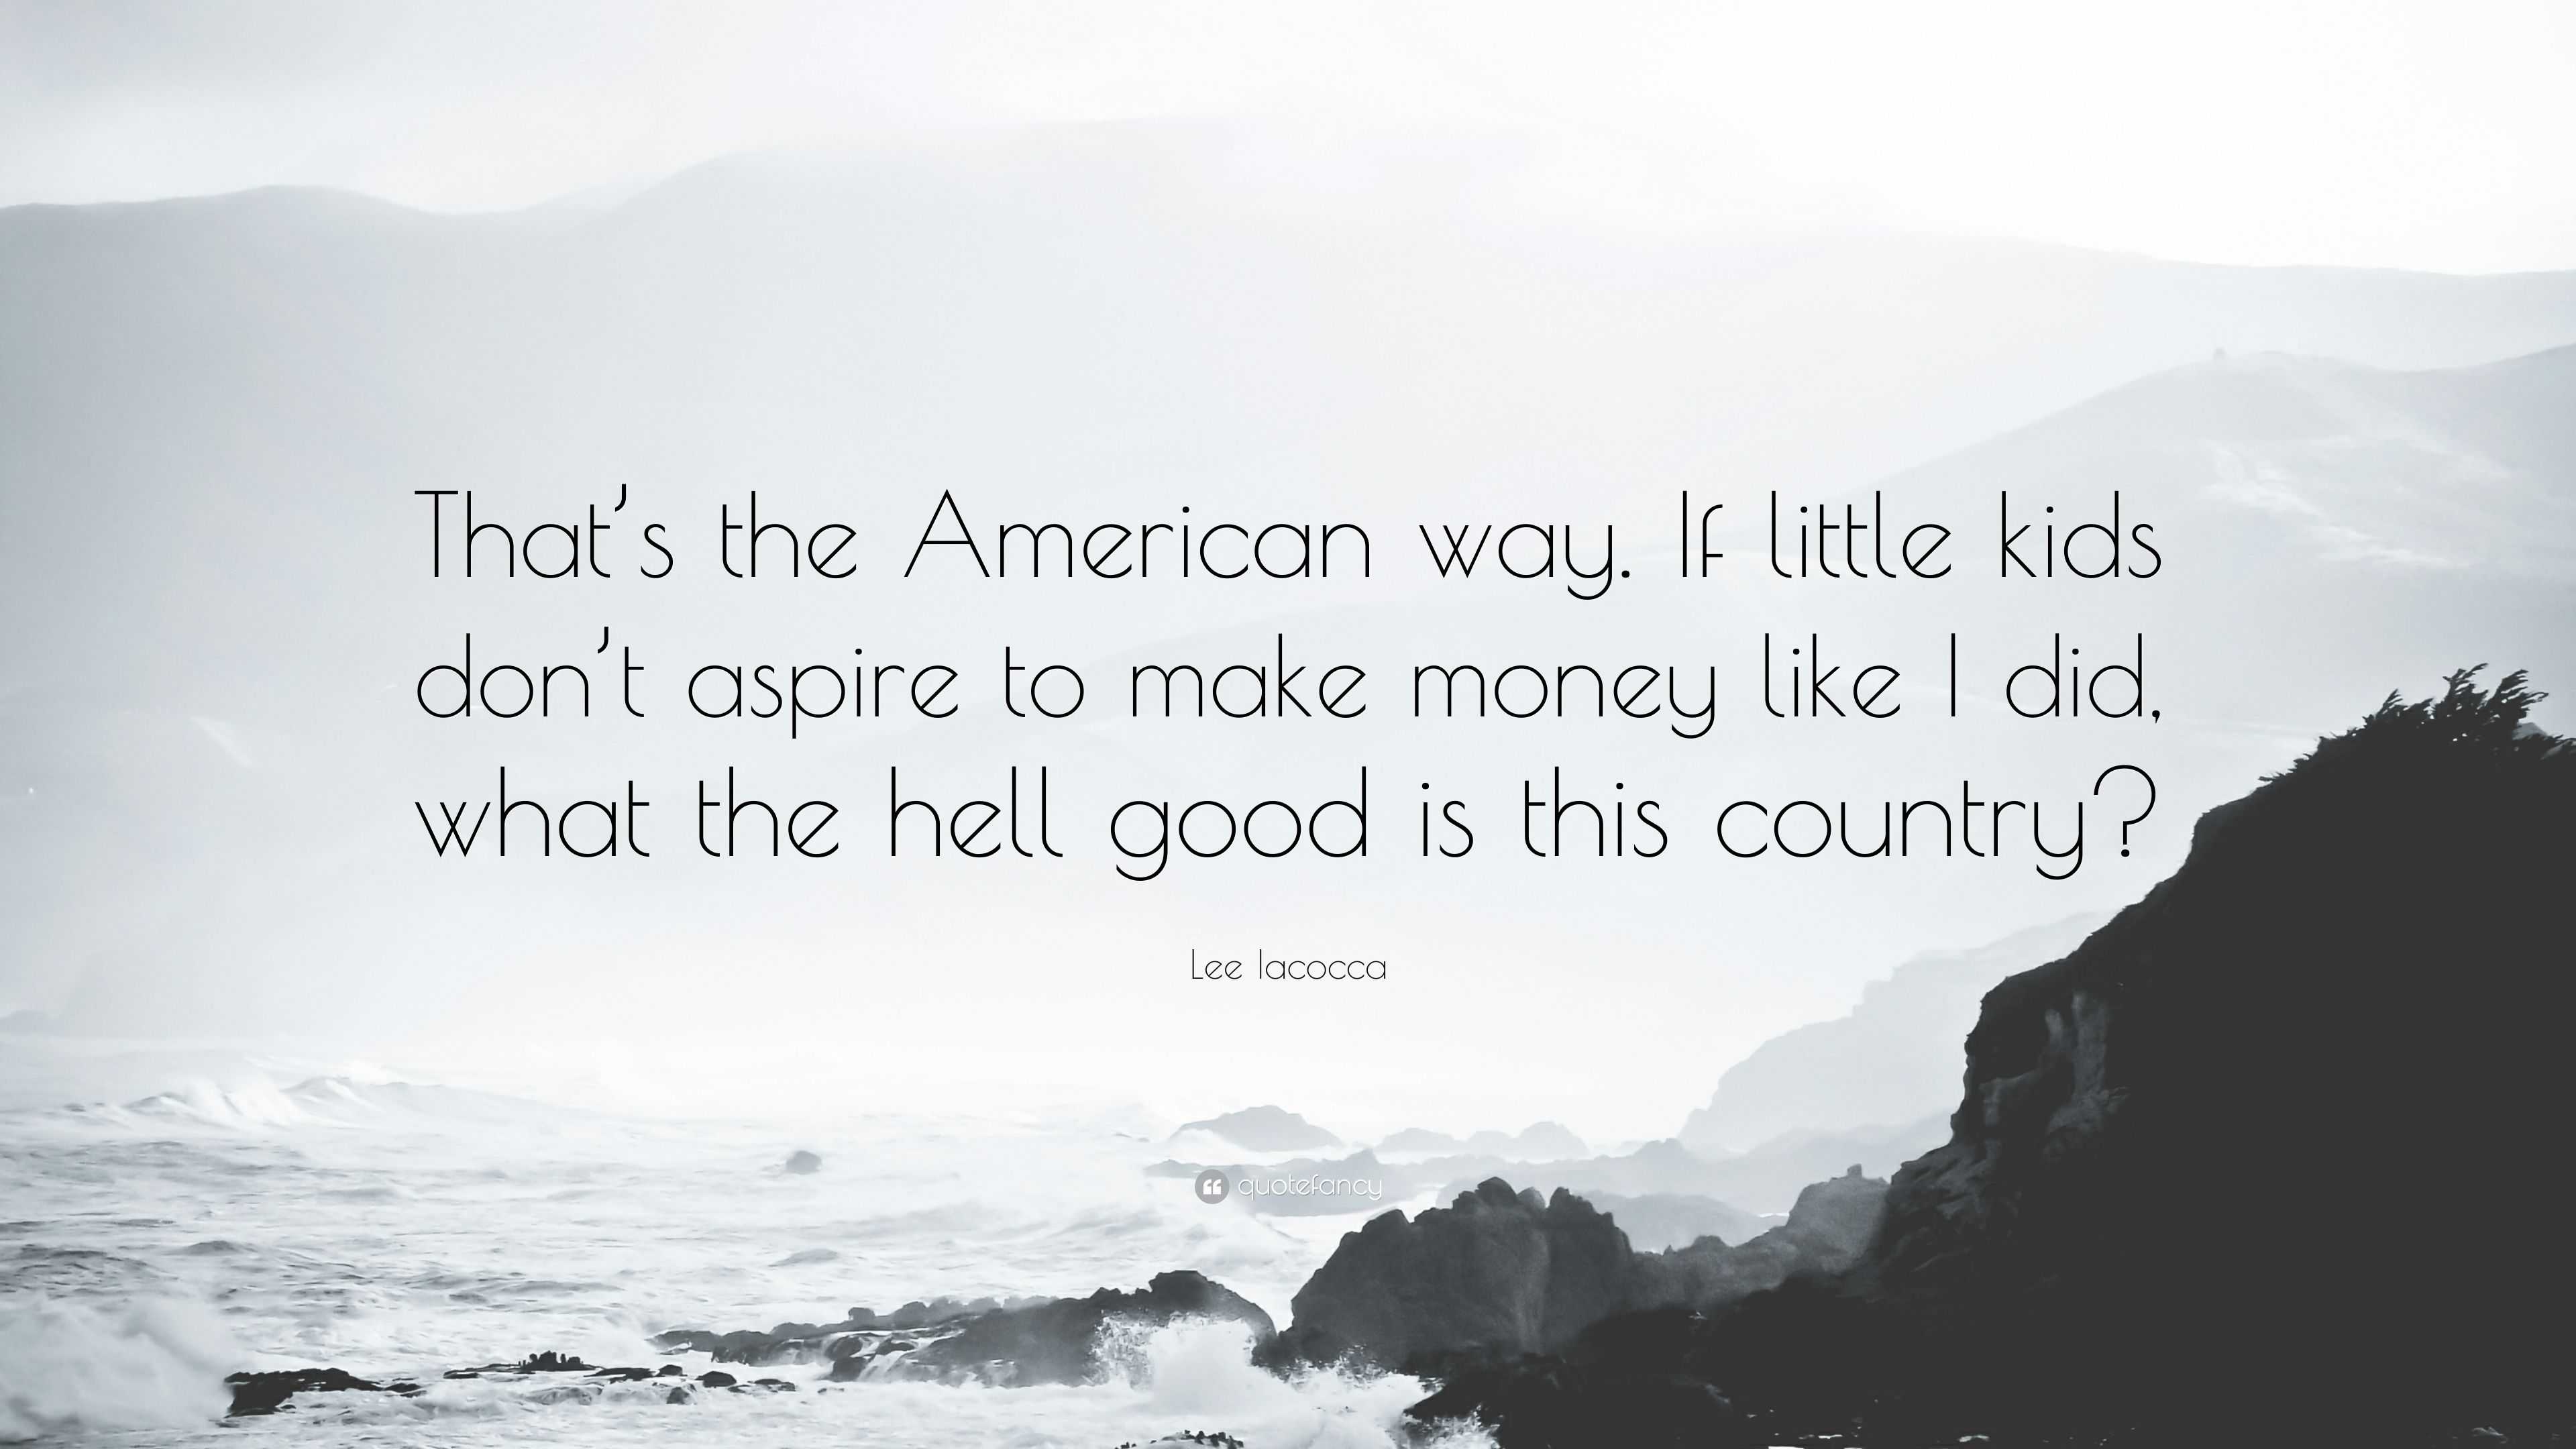 Lee Iacocca Quote: “That's the American way. If little kids don't aspire to make  money